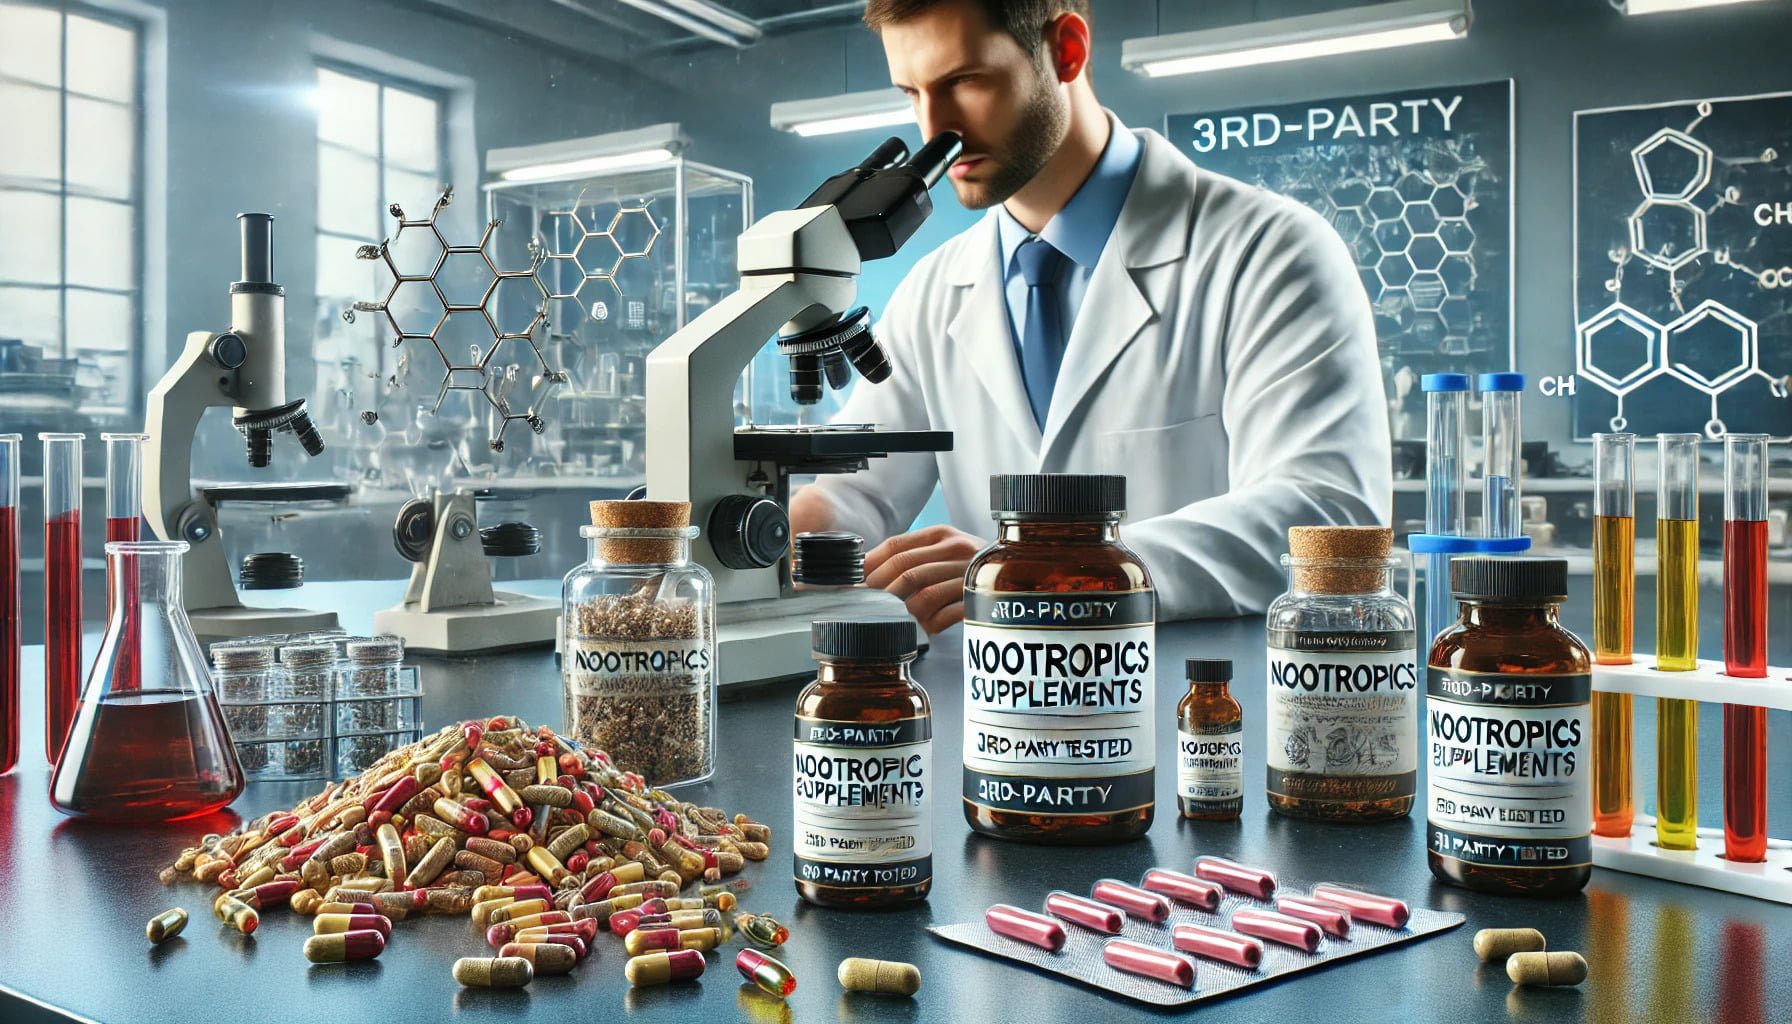 A photorealistic image of nootropics going through third-party testing.